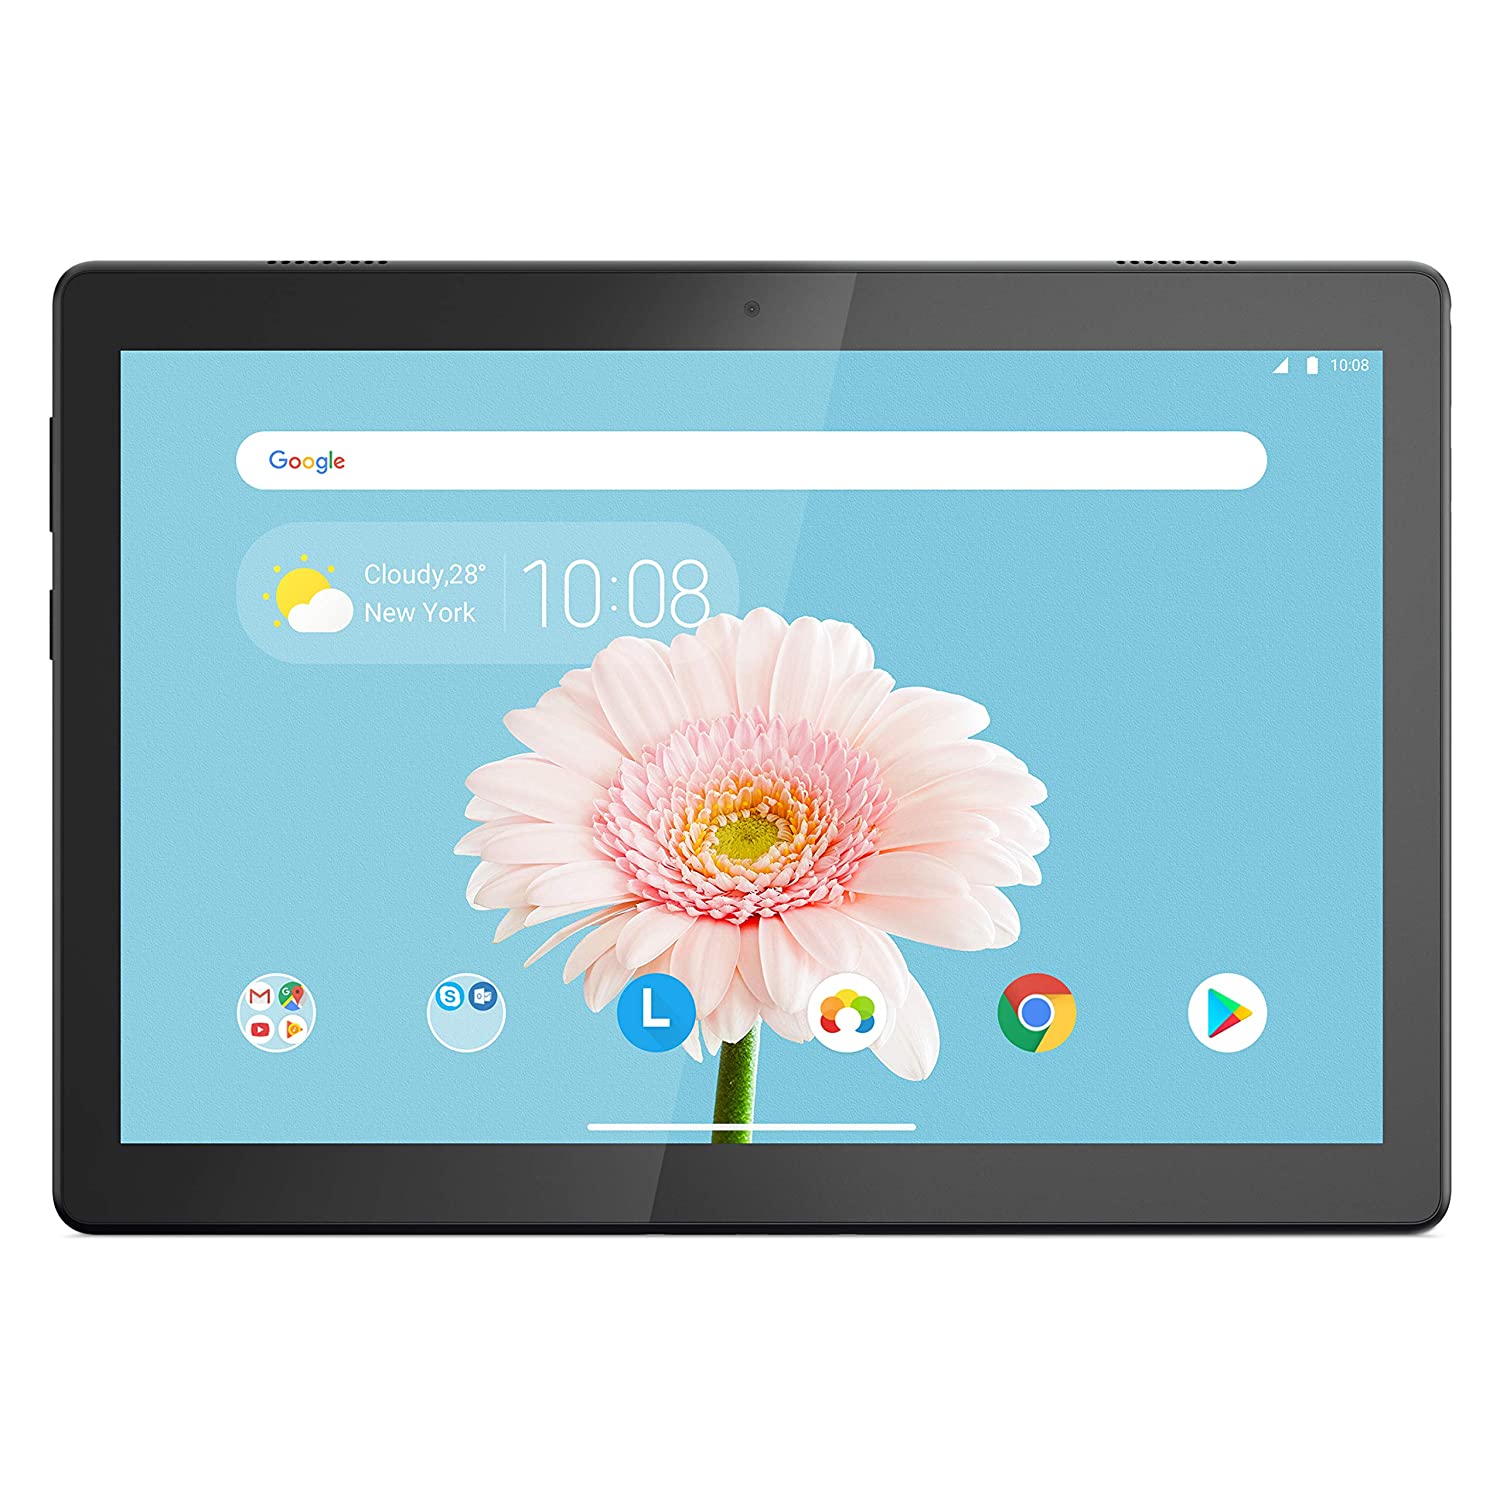 Amazon Festival Sale: Buy this gift to make kids happy this Diwali, more than 10 thousand discount on Lenovo Tablet in sale